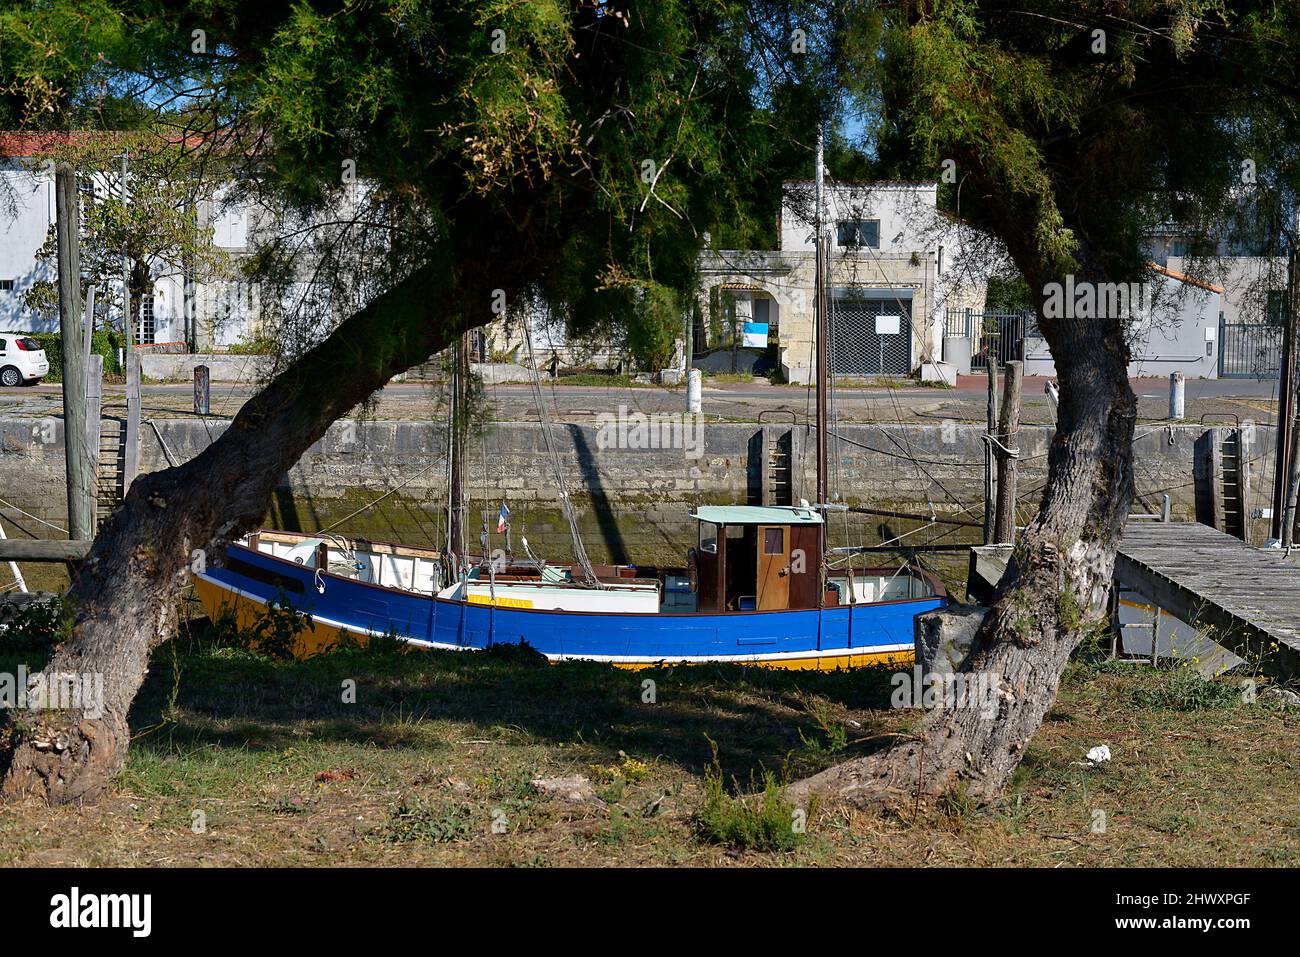 Boat and two tamarisk trees at La Tremblade, a commune in the Charente-Maritime department and Nouvelle-Aquitaine region in south-western France Stock Photo